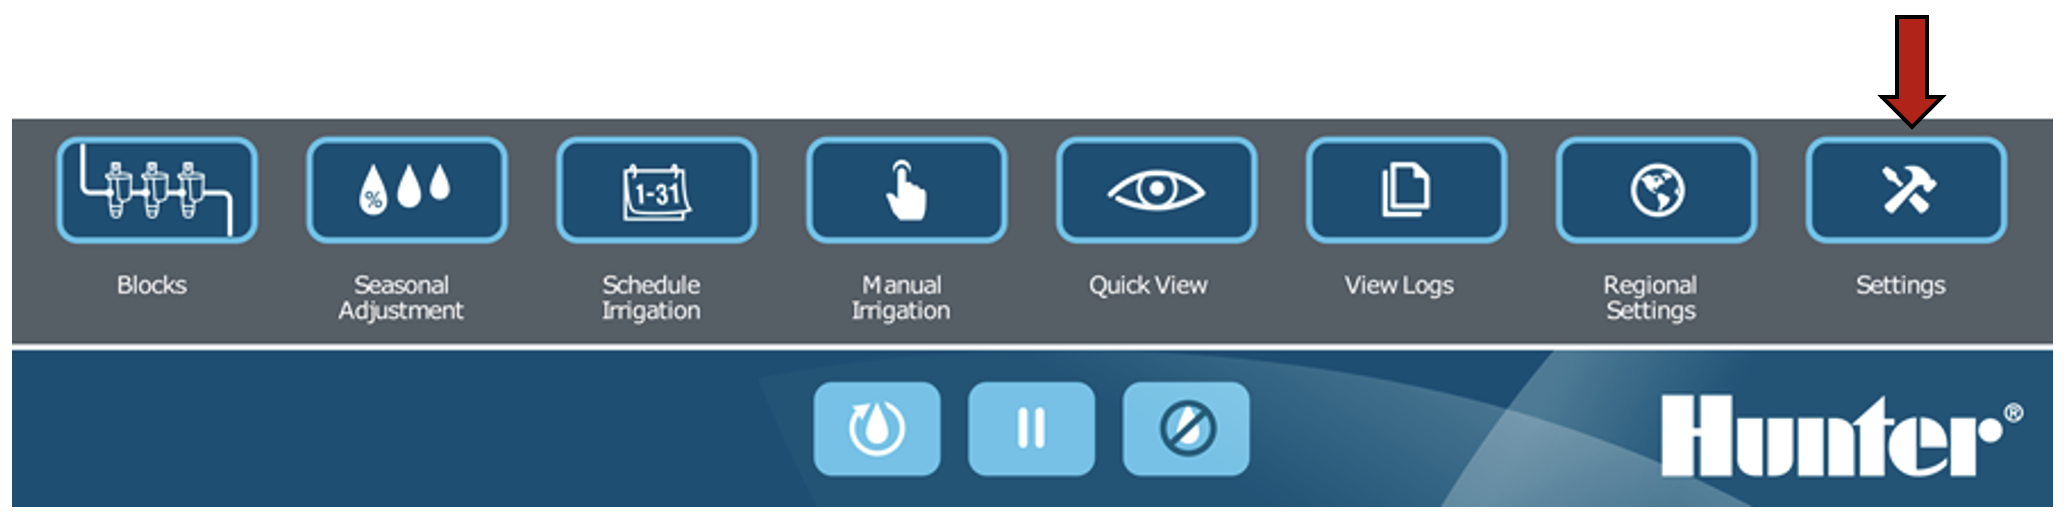 Image of the interface with the Settings button.